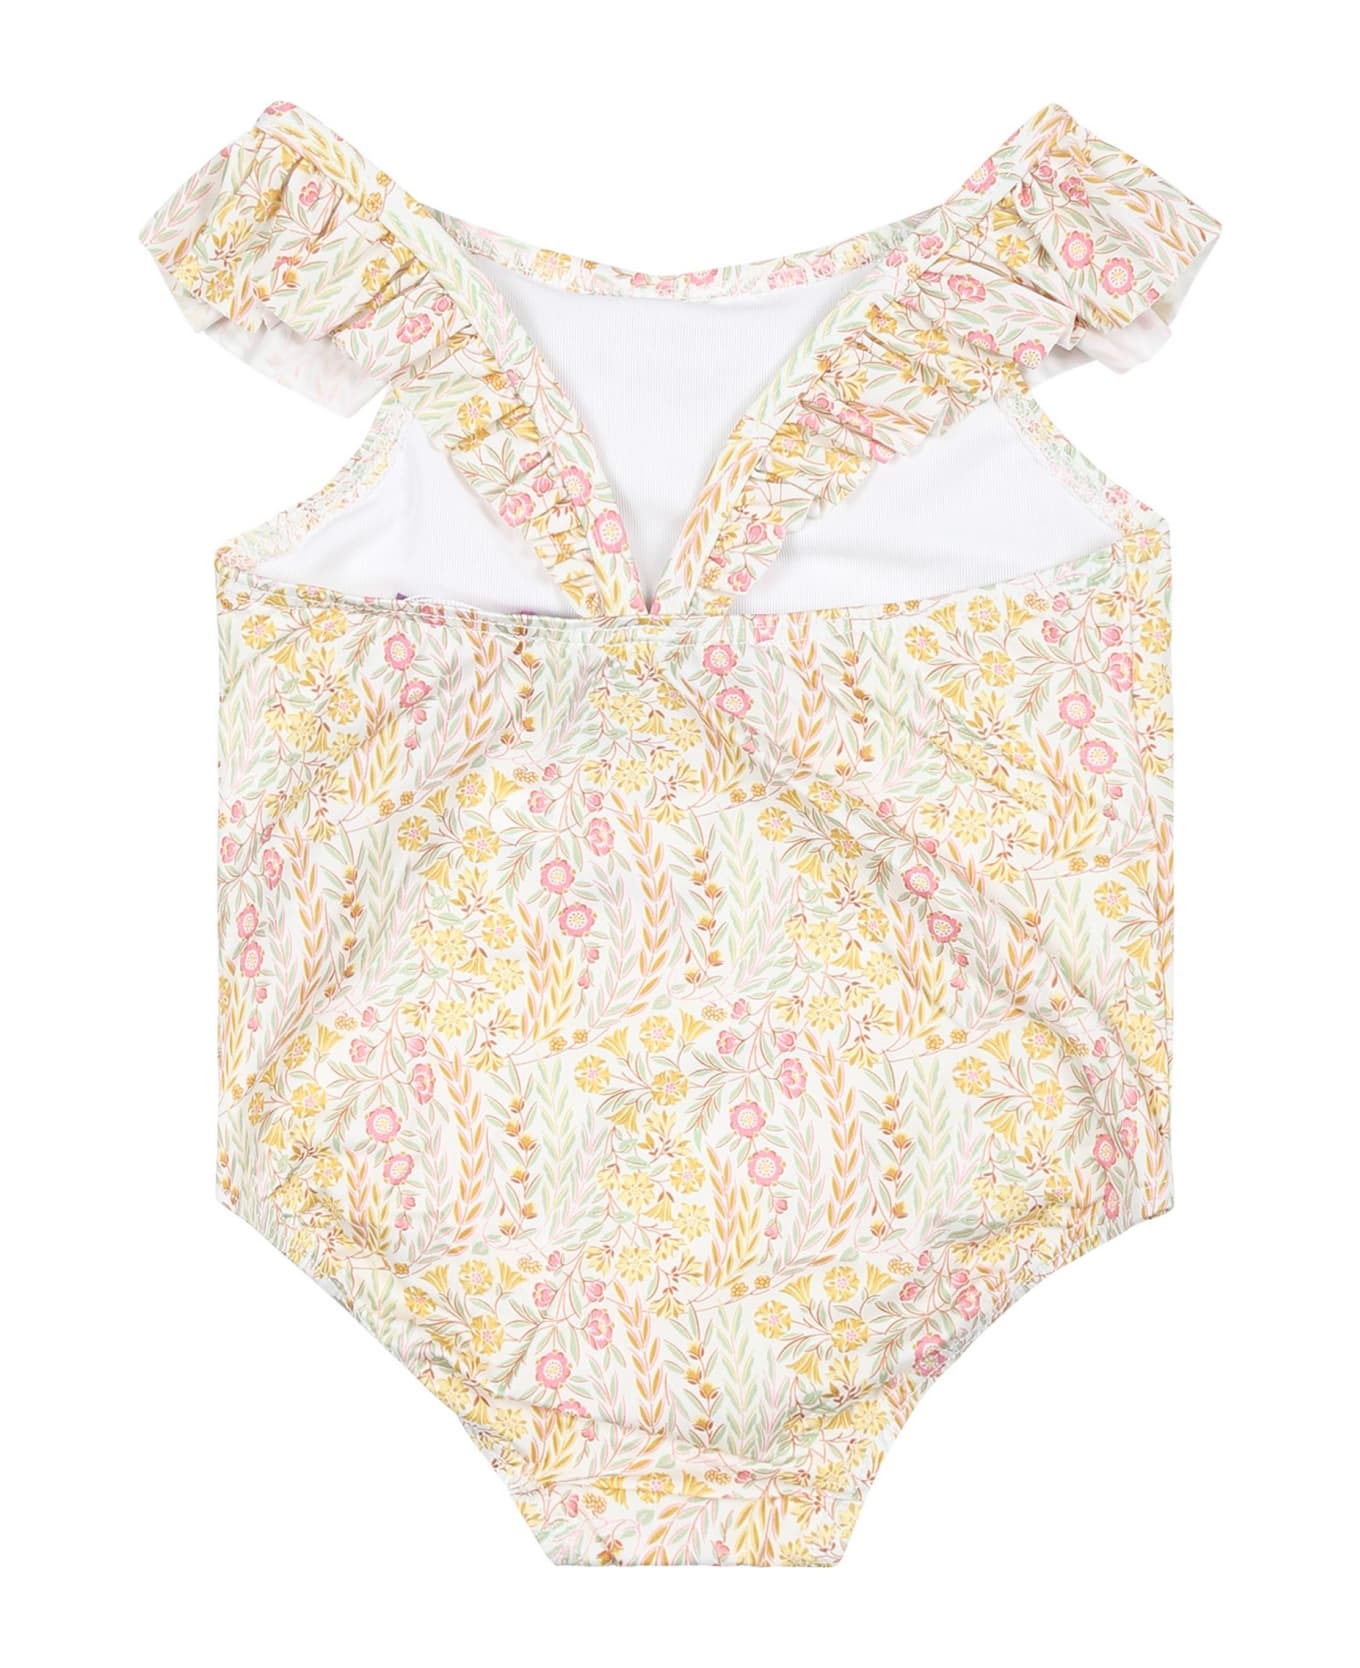 Tartine et Chocolat Ivory One-piece Swimsuit For Baby Girl With Liberty Fabric - Ivory